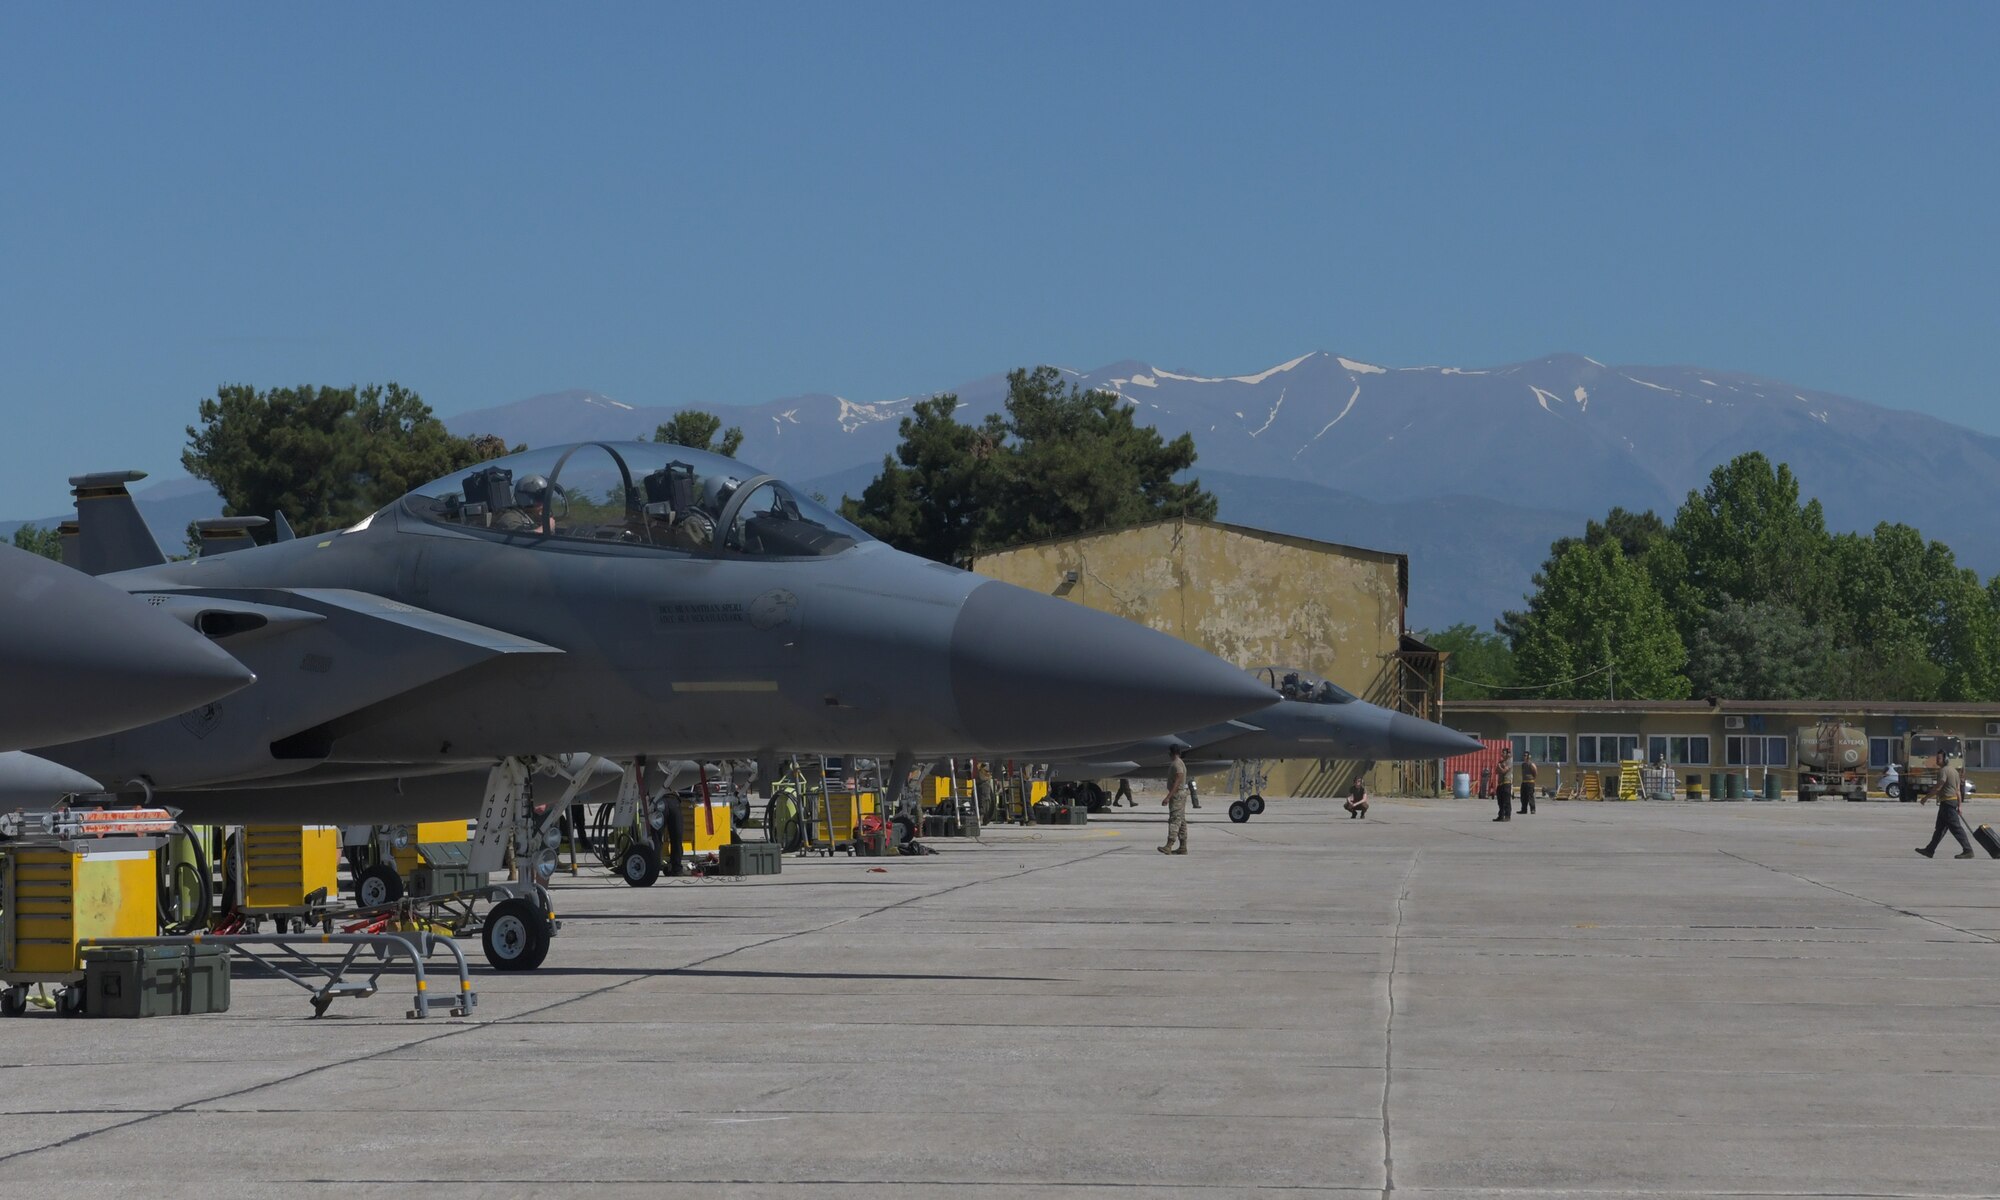 A U.S. Air Force F-15D Eagle assigned to the 493rd Fighter Squadron prepares to taxi prior to take-off during exercise Astral Knight 21 at Larissa Air Base, Greece, May 19, 2021. The 48th Fighter Wing trained and integrated with allied NATO nations during Astral Knight 21, May 17 - 21, 2021, strengthening partnerships and rapid deployment capabilities. (U.S. Air Force photo by Tech. Sgt. Alex Fox Echols III)